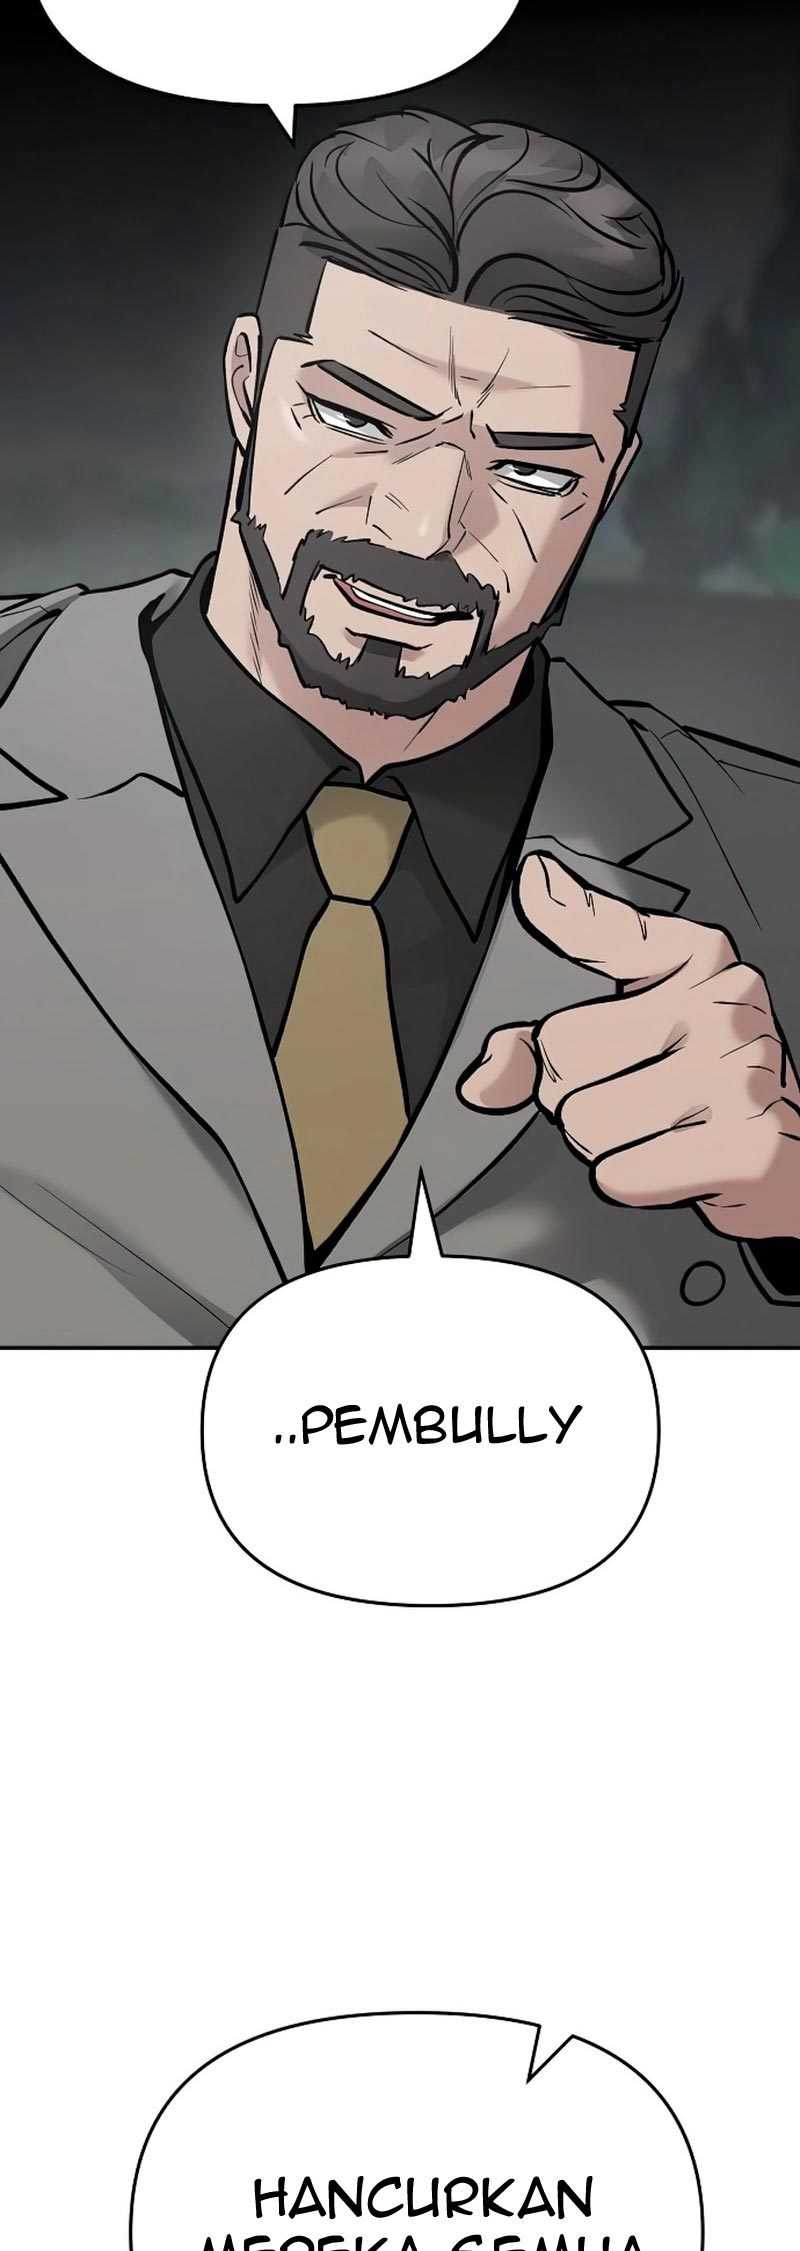 The Bully In Charge Chapter 50